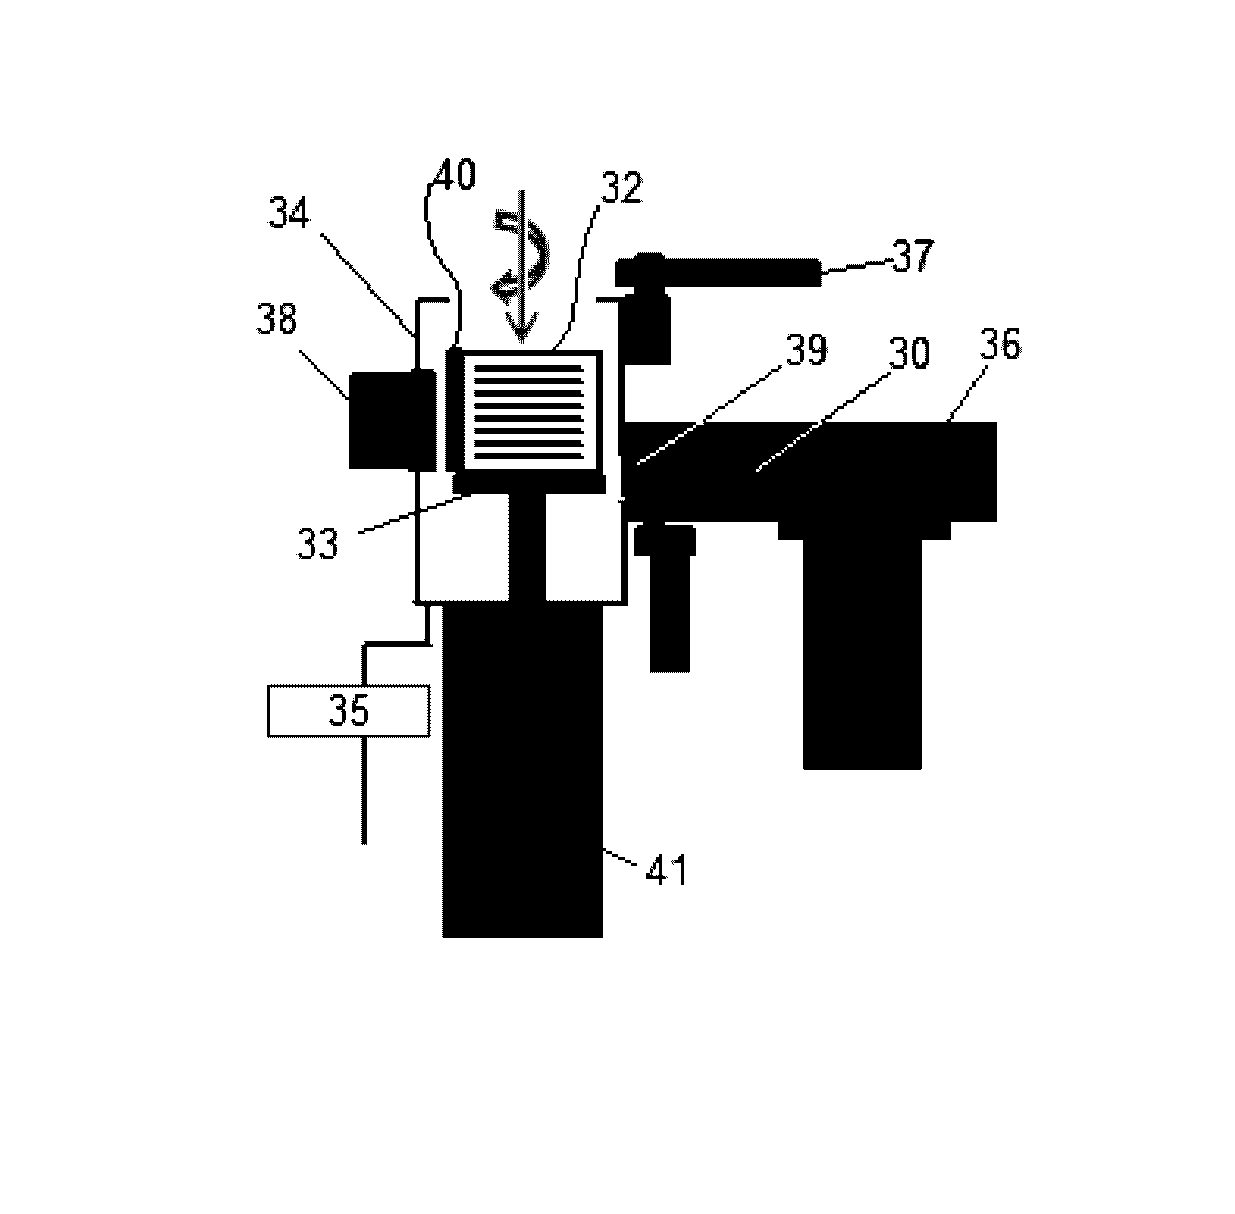 Apparatus and method for transporting wafers between wafer carrier and process tool under vacuum